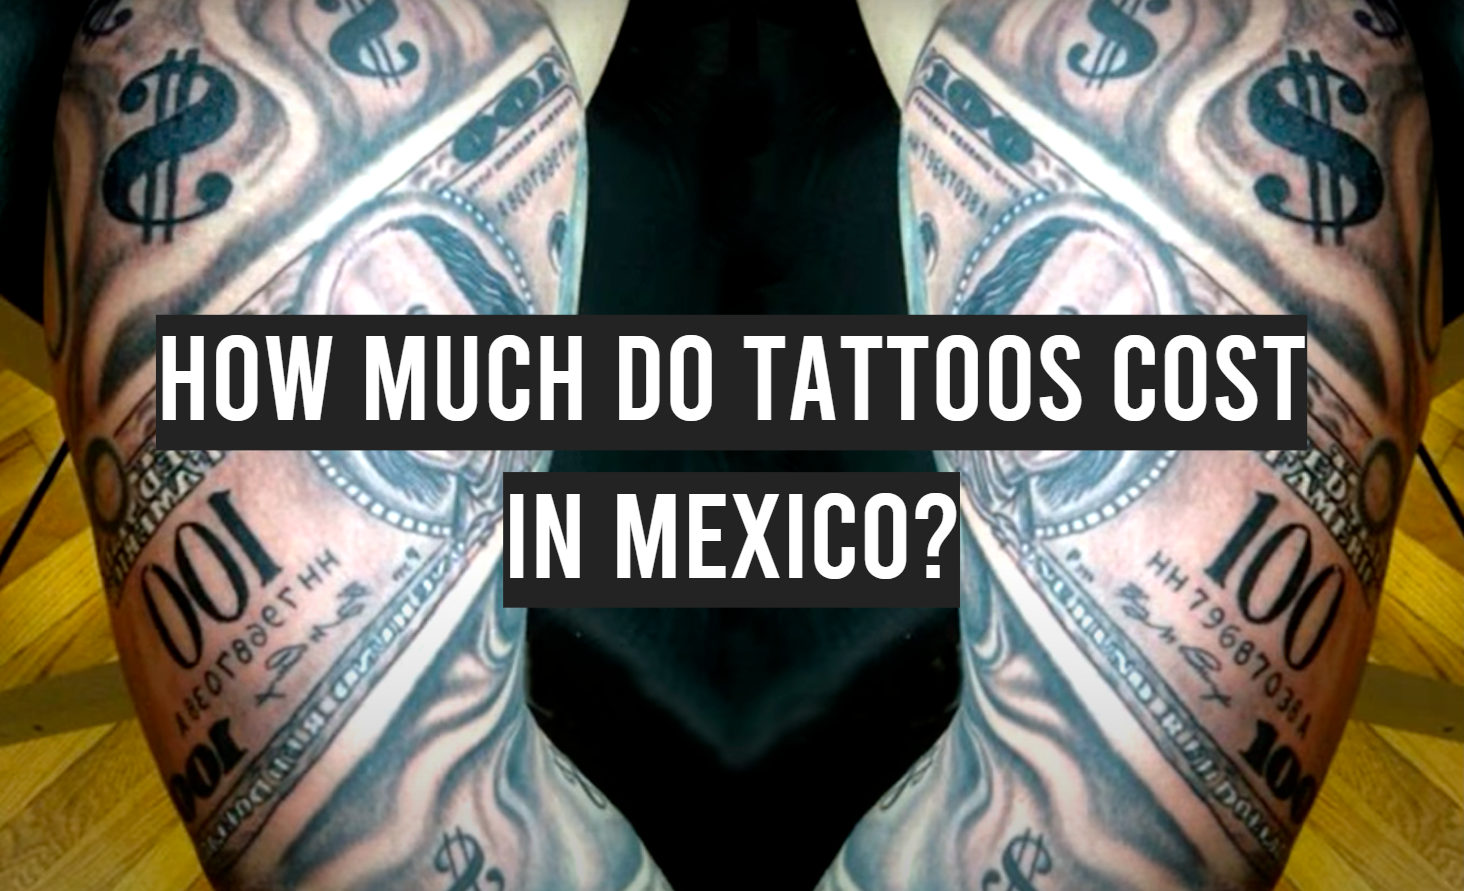 How Much Do Tattoos Cost in Mexico?